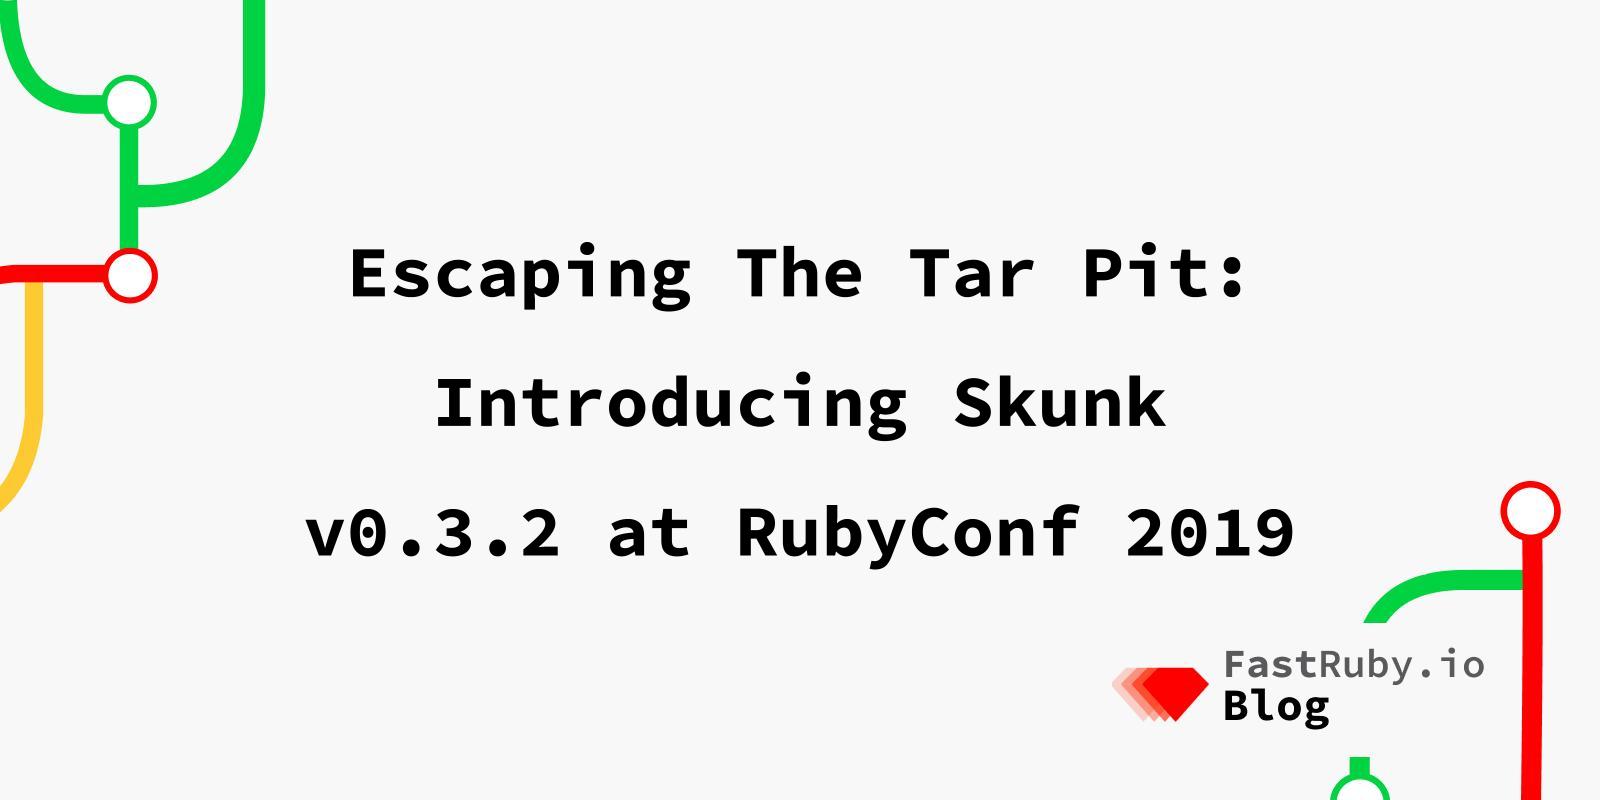 Escaping The Tar Pit: Introducing Skunk v0.3.2 at RubyConf 2019